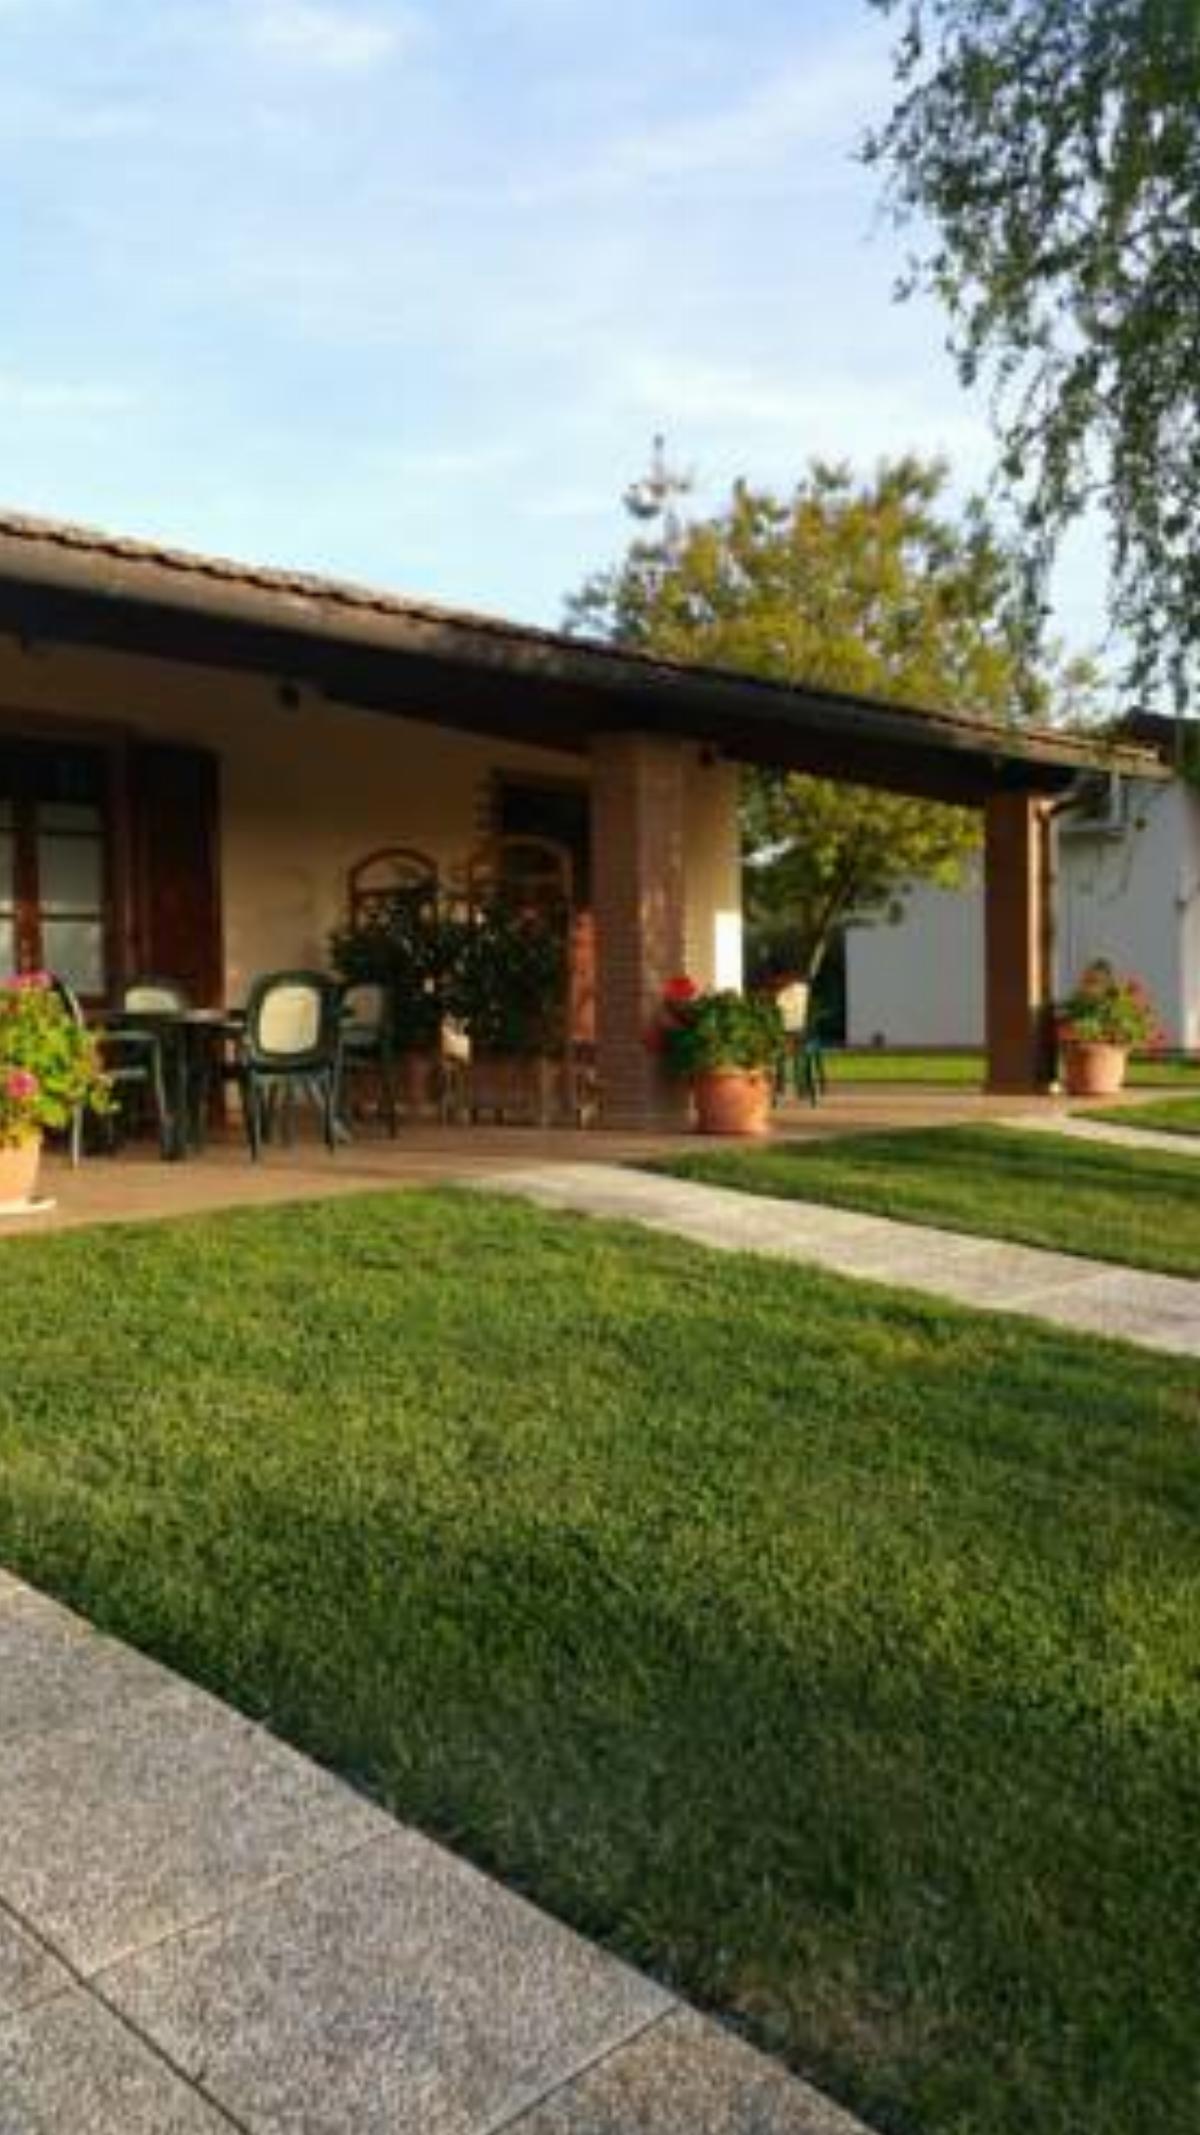 Agriturismo Arcobaleno Hotel Bagno Roselle Italy